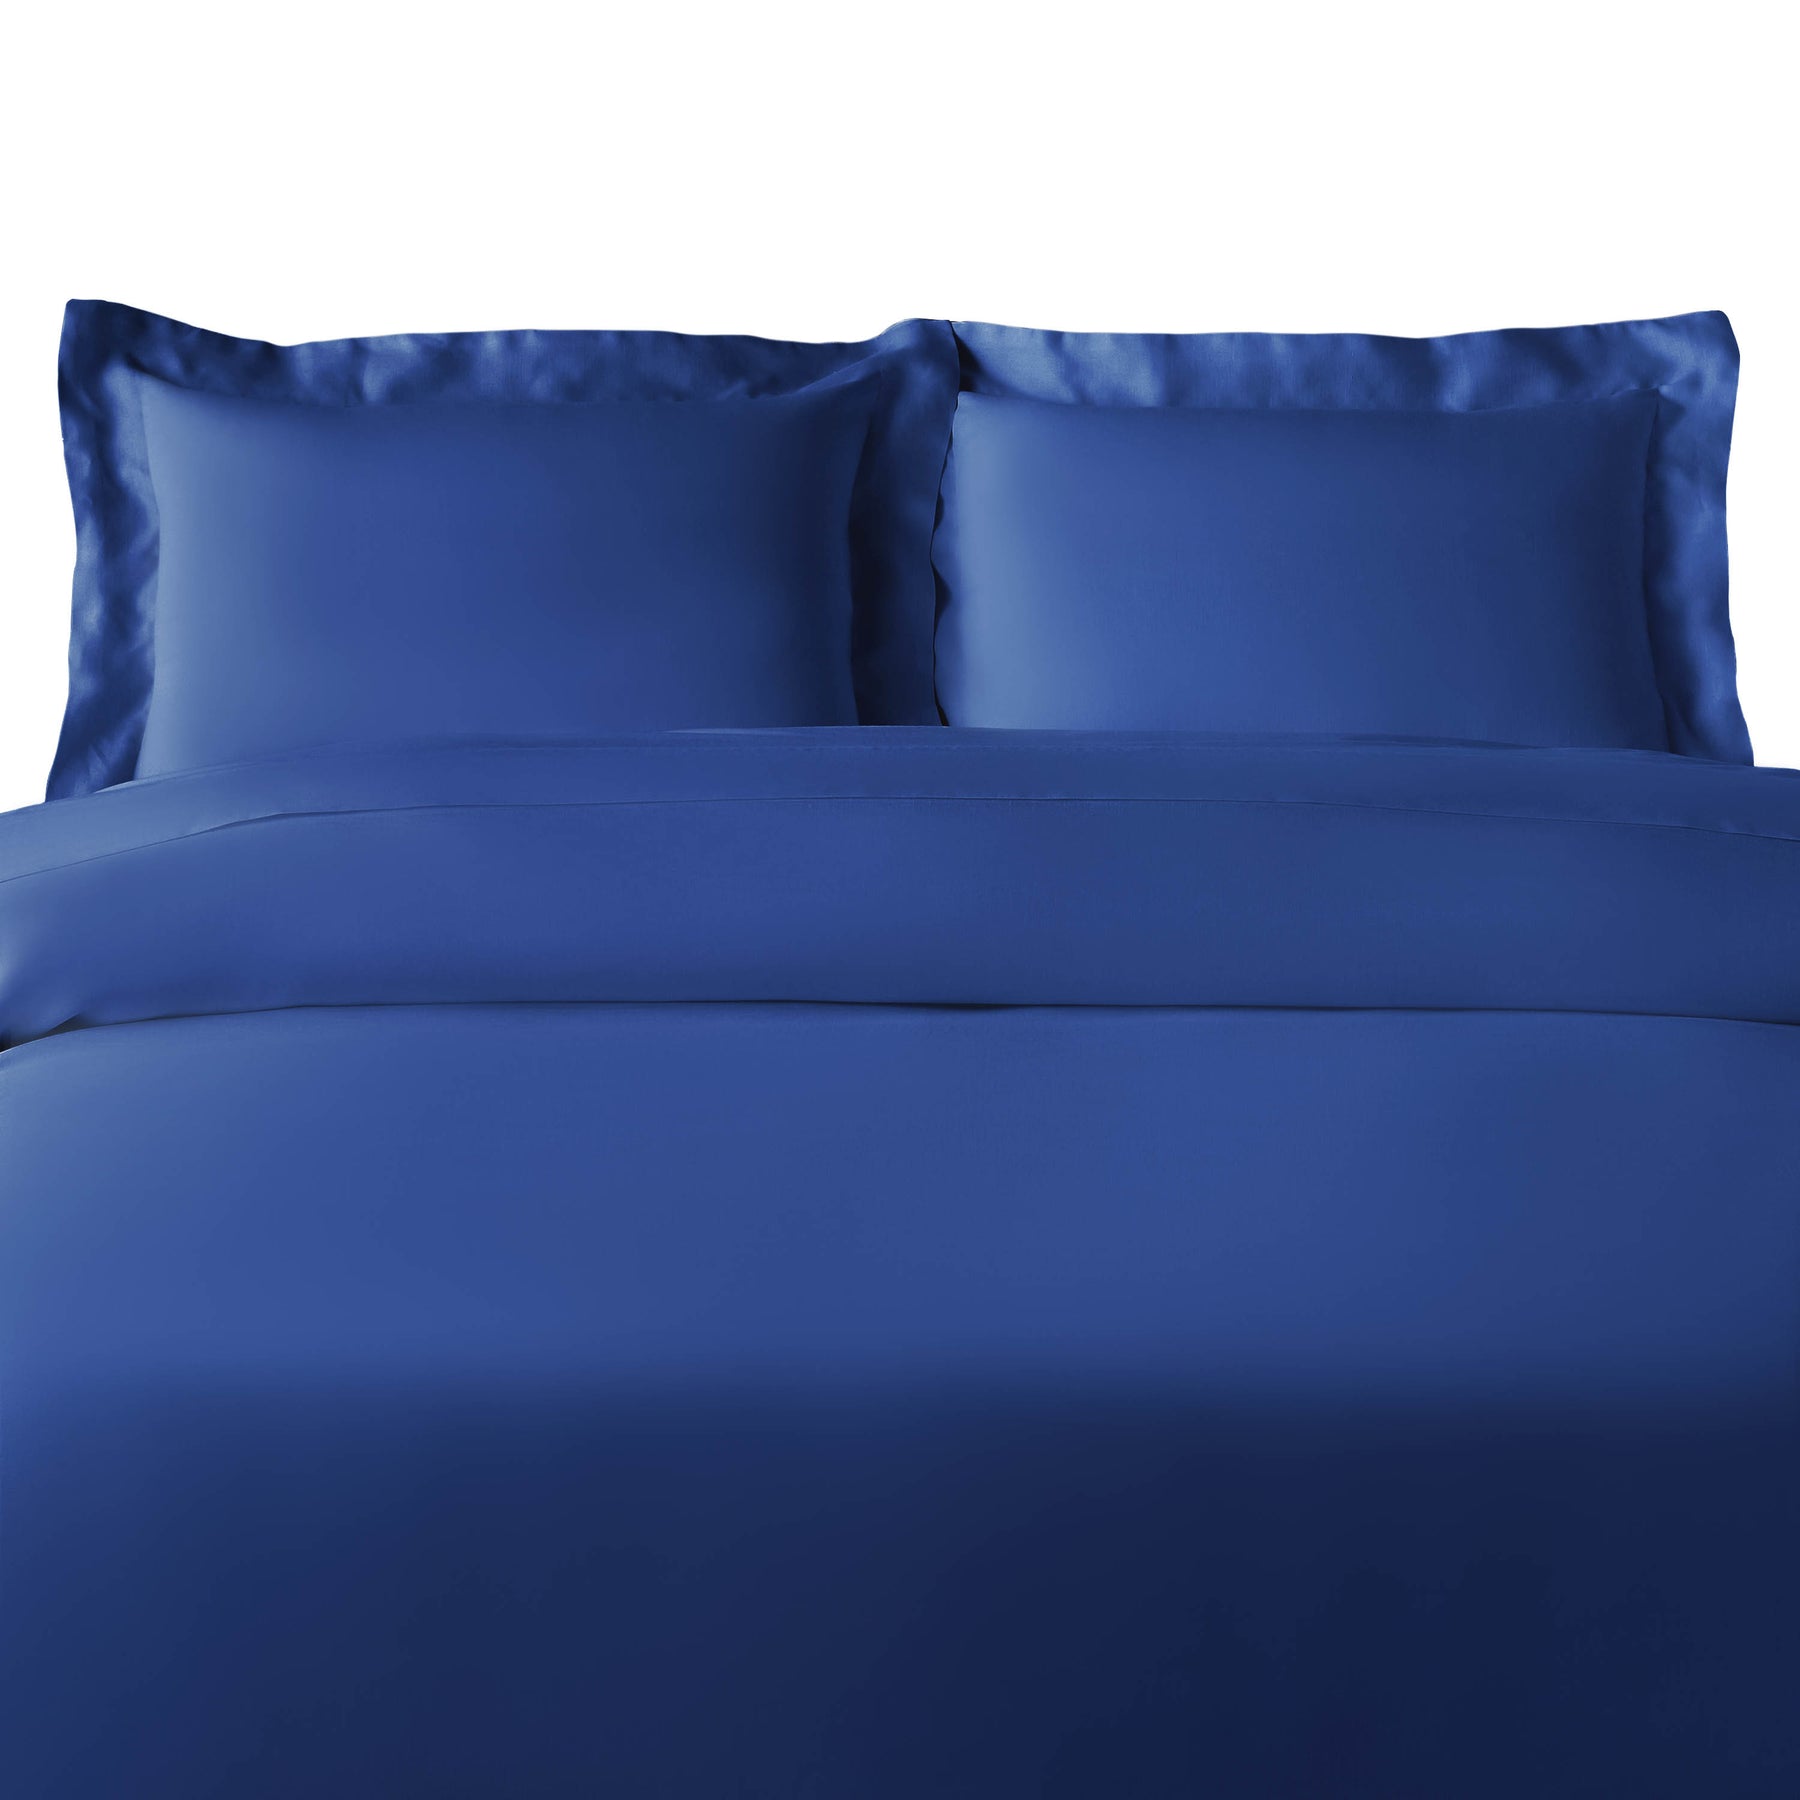 100% Rayon From Bamboo 300 Thread Count Solid Duvet Cover Set - SmokedBlue